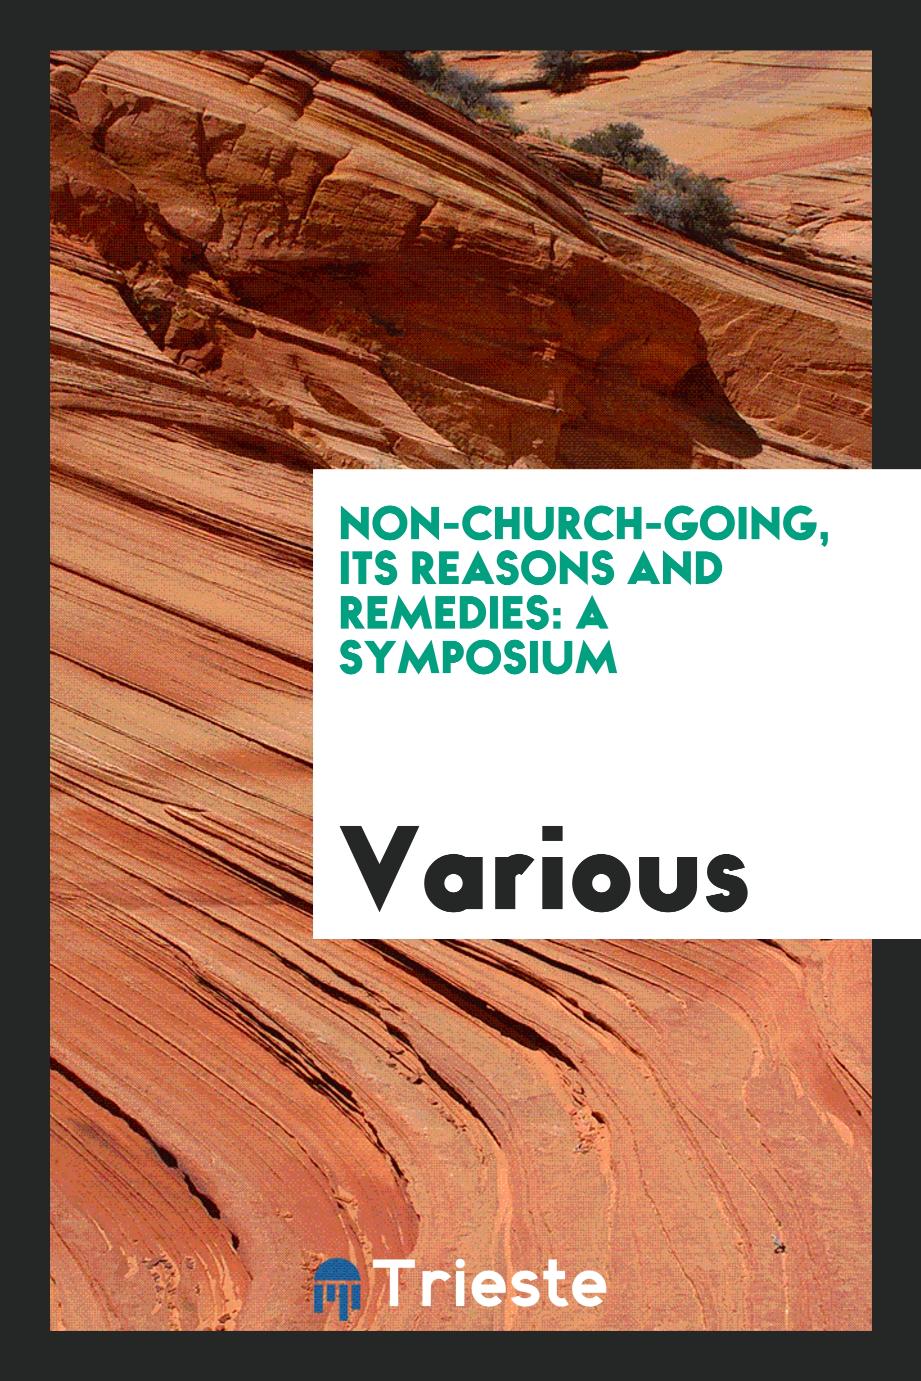 Non-church-going, its reasons and remedies: a symposium